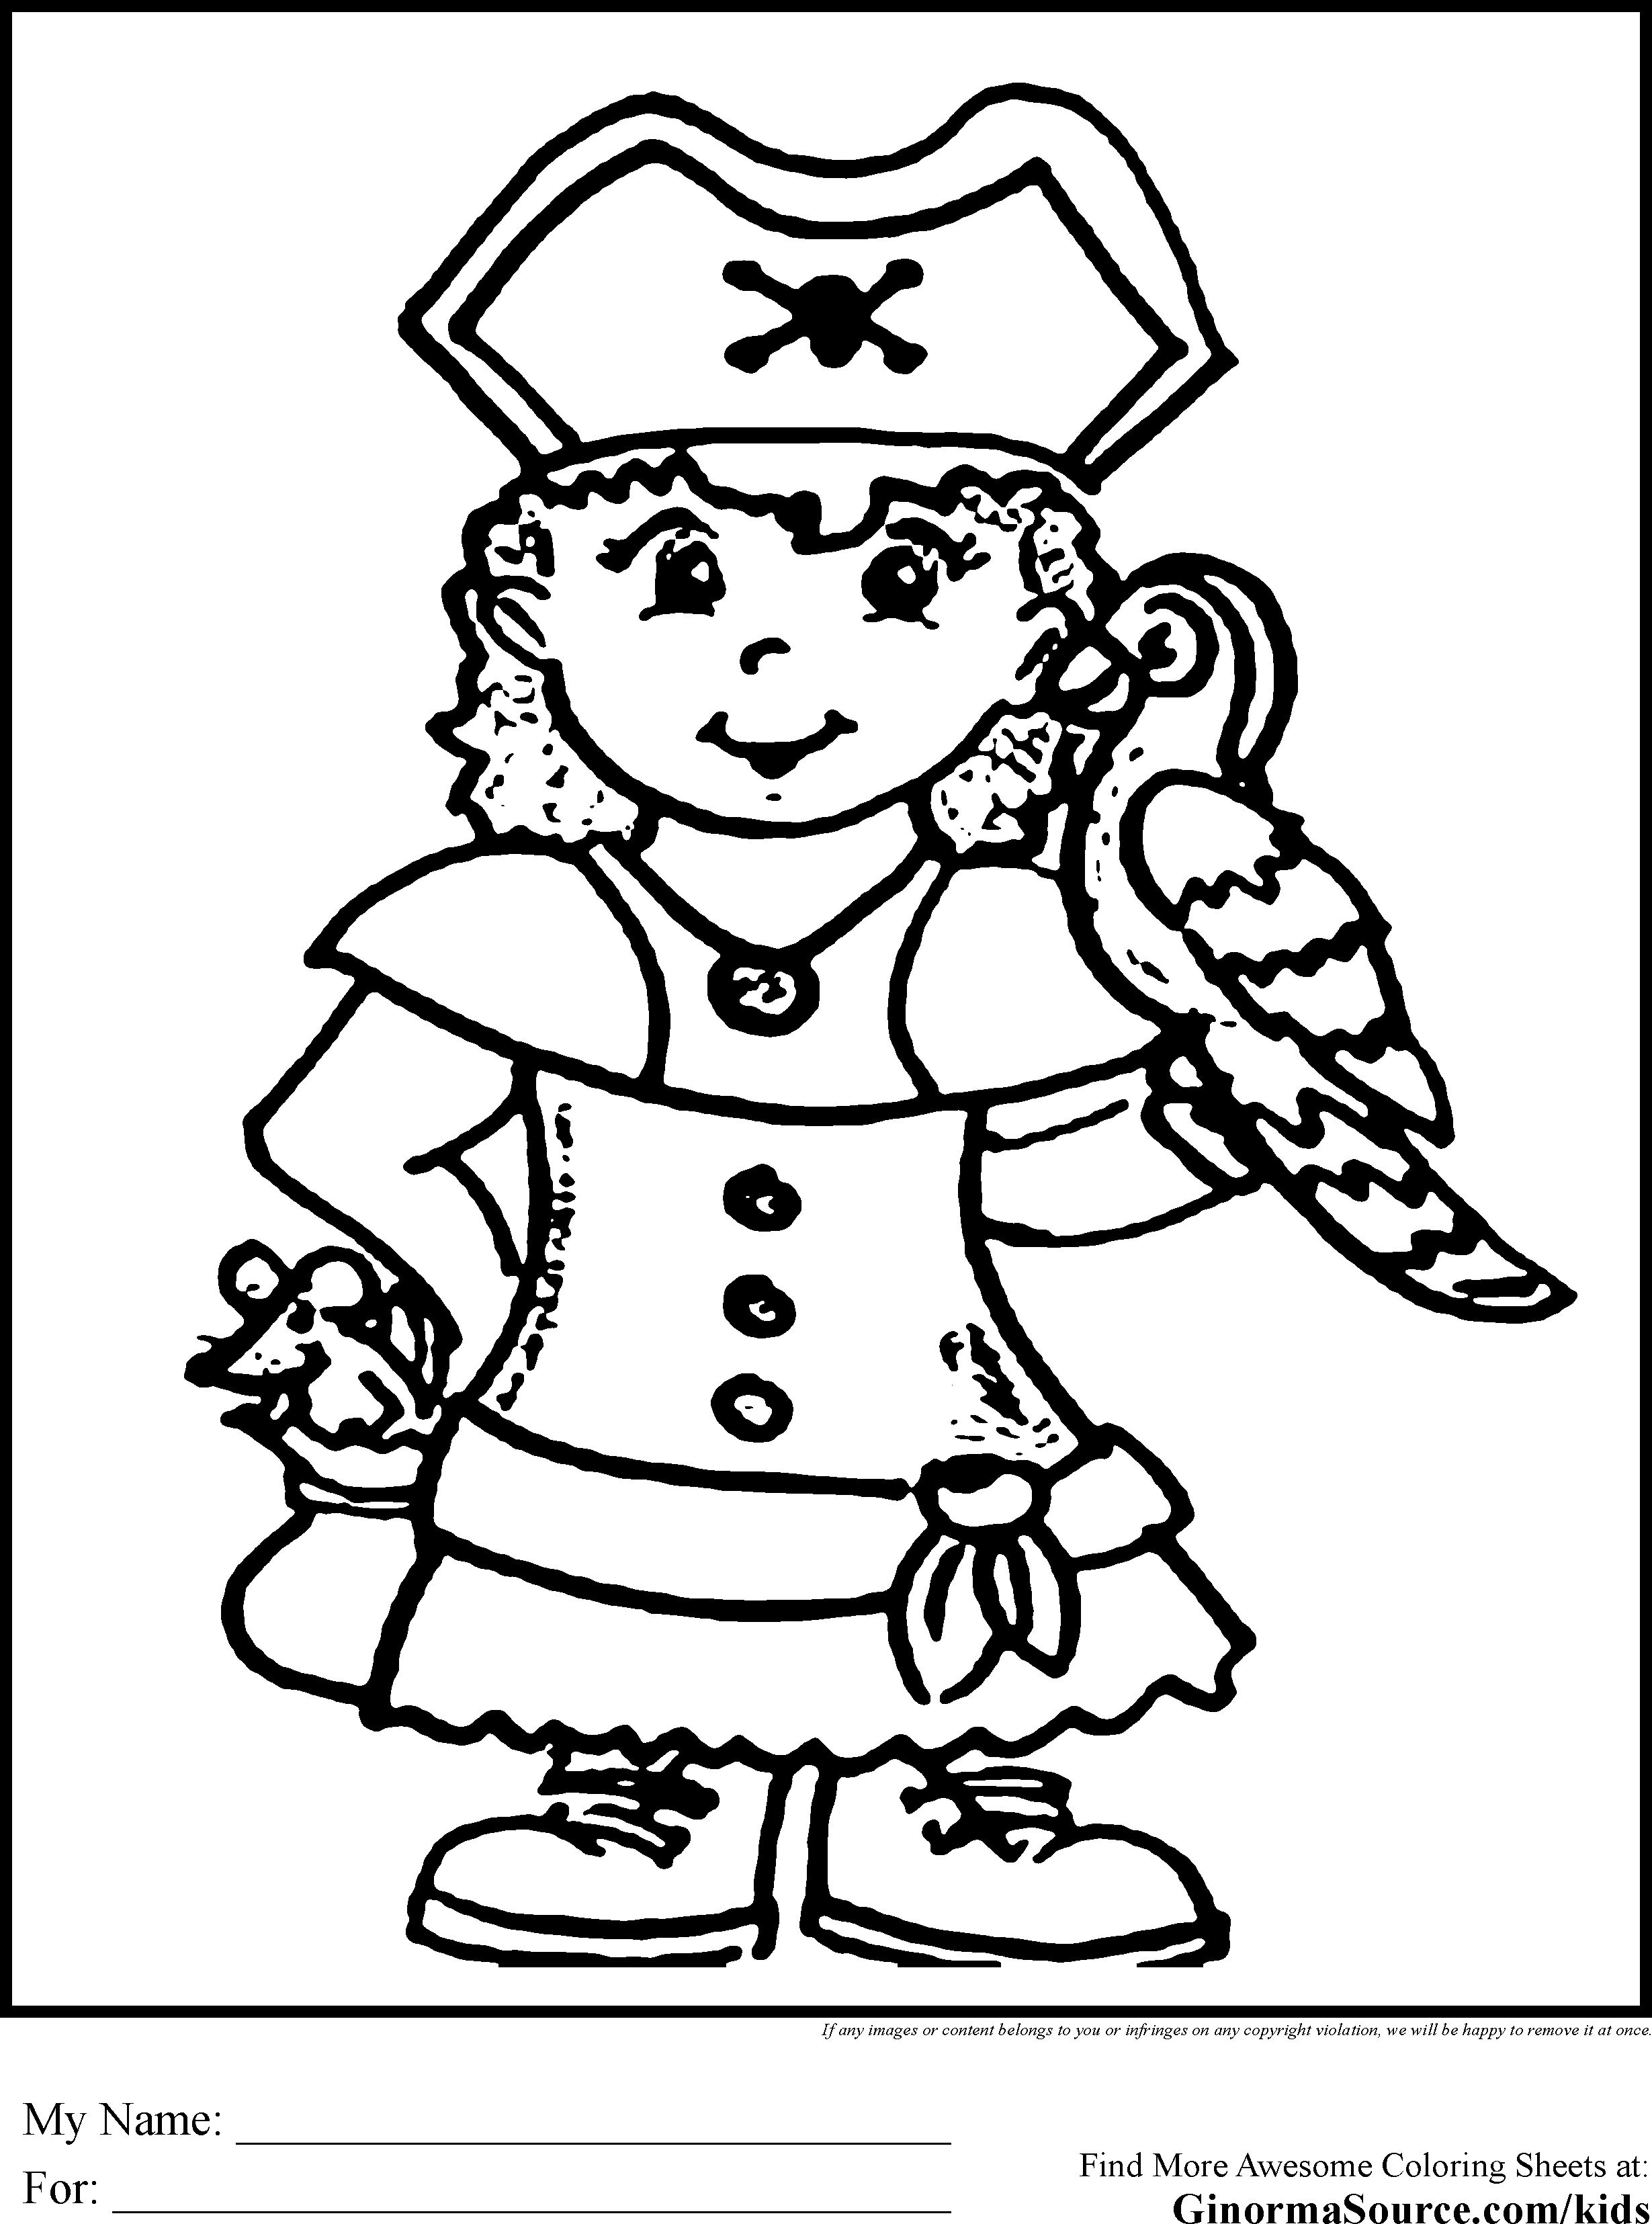 Pirate Coloring Pages girl - GINORMAsource Kids